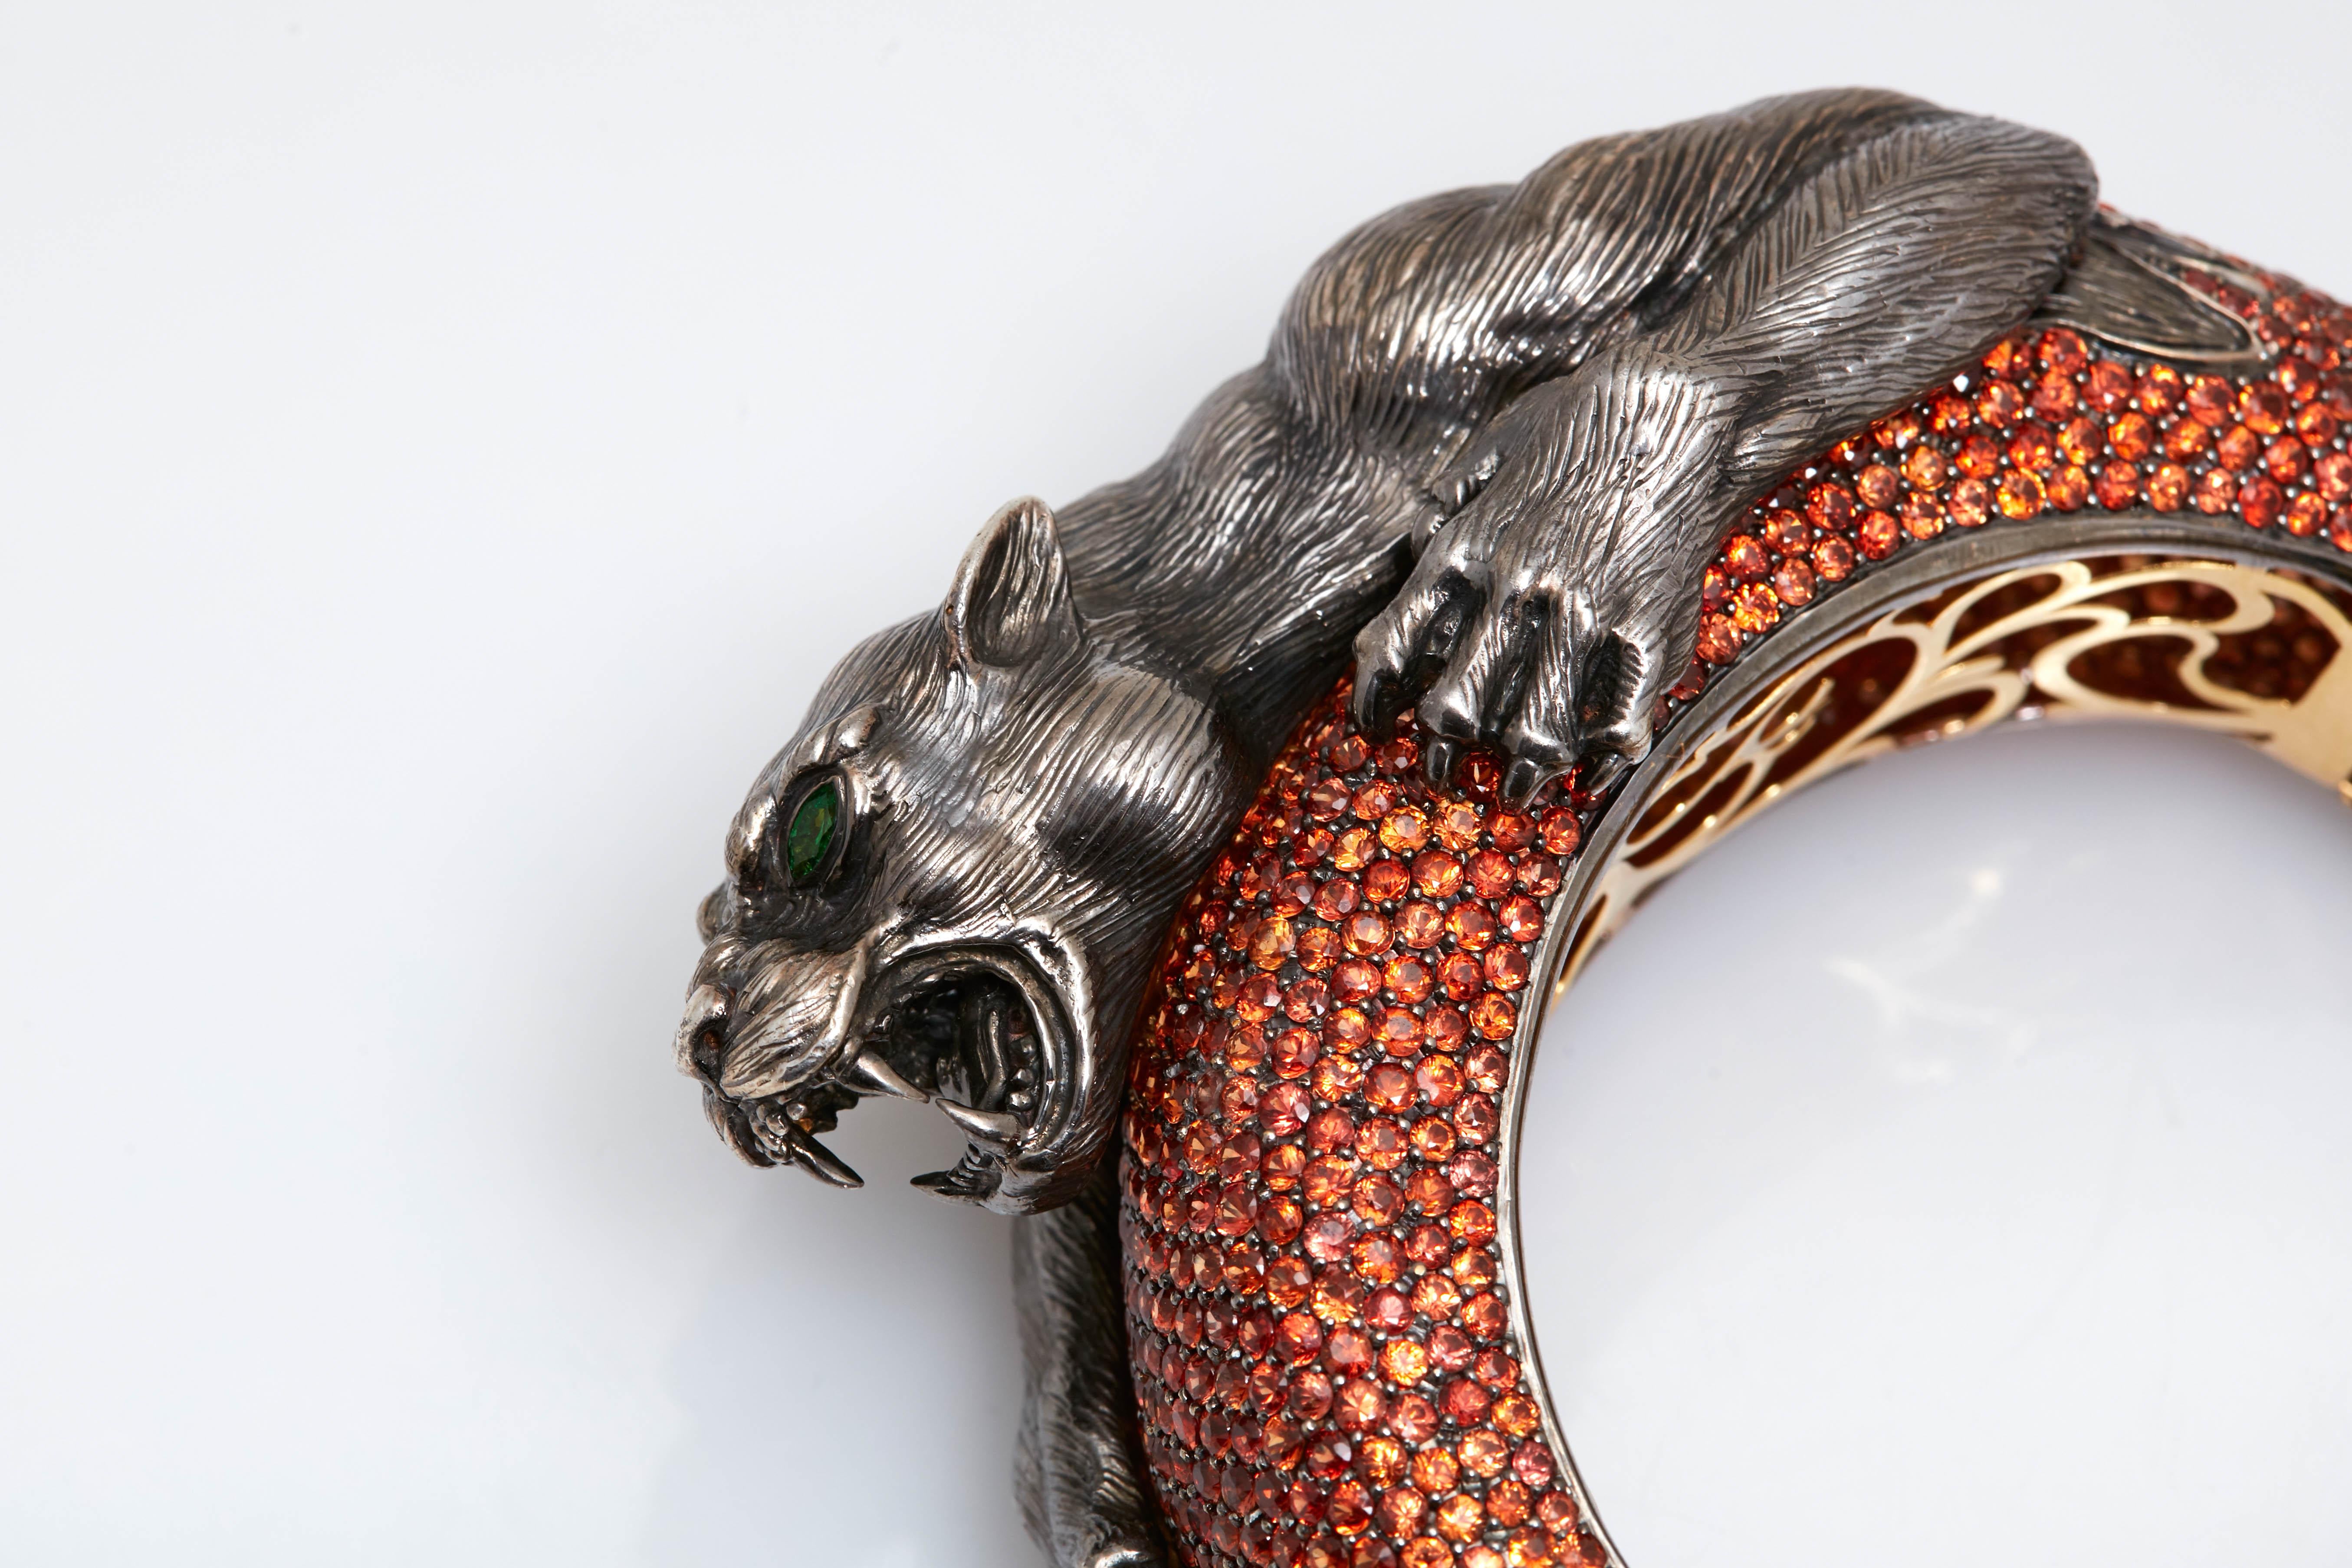 A panther bracelet in 18kt yellow gold and black rhodium with orange sapphires; hand-textured feline beast made of sterling silver with emerald eyes. Signed by Sabbadini, made in Italy, circa 1980s.